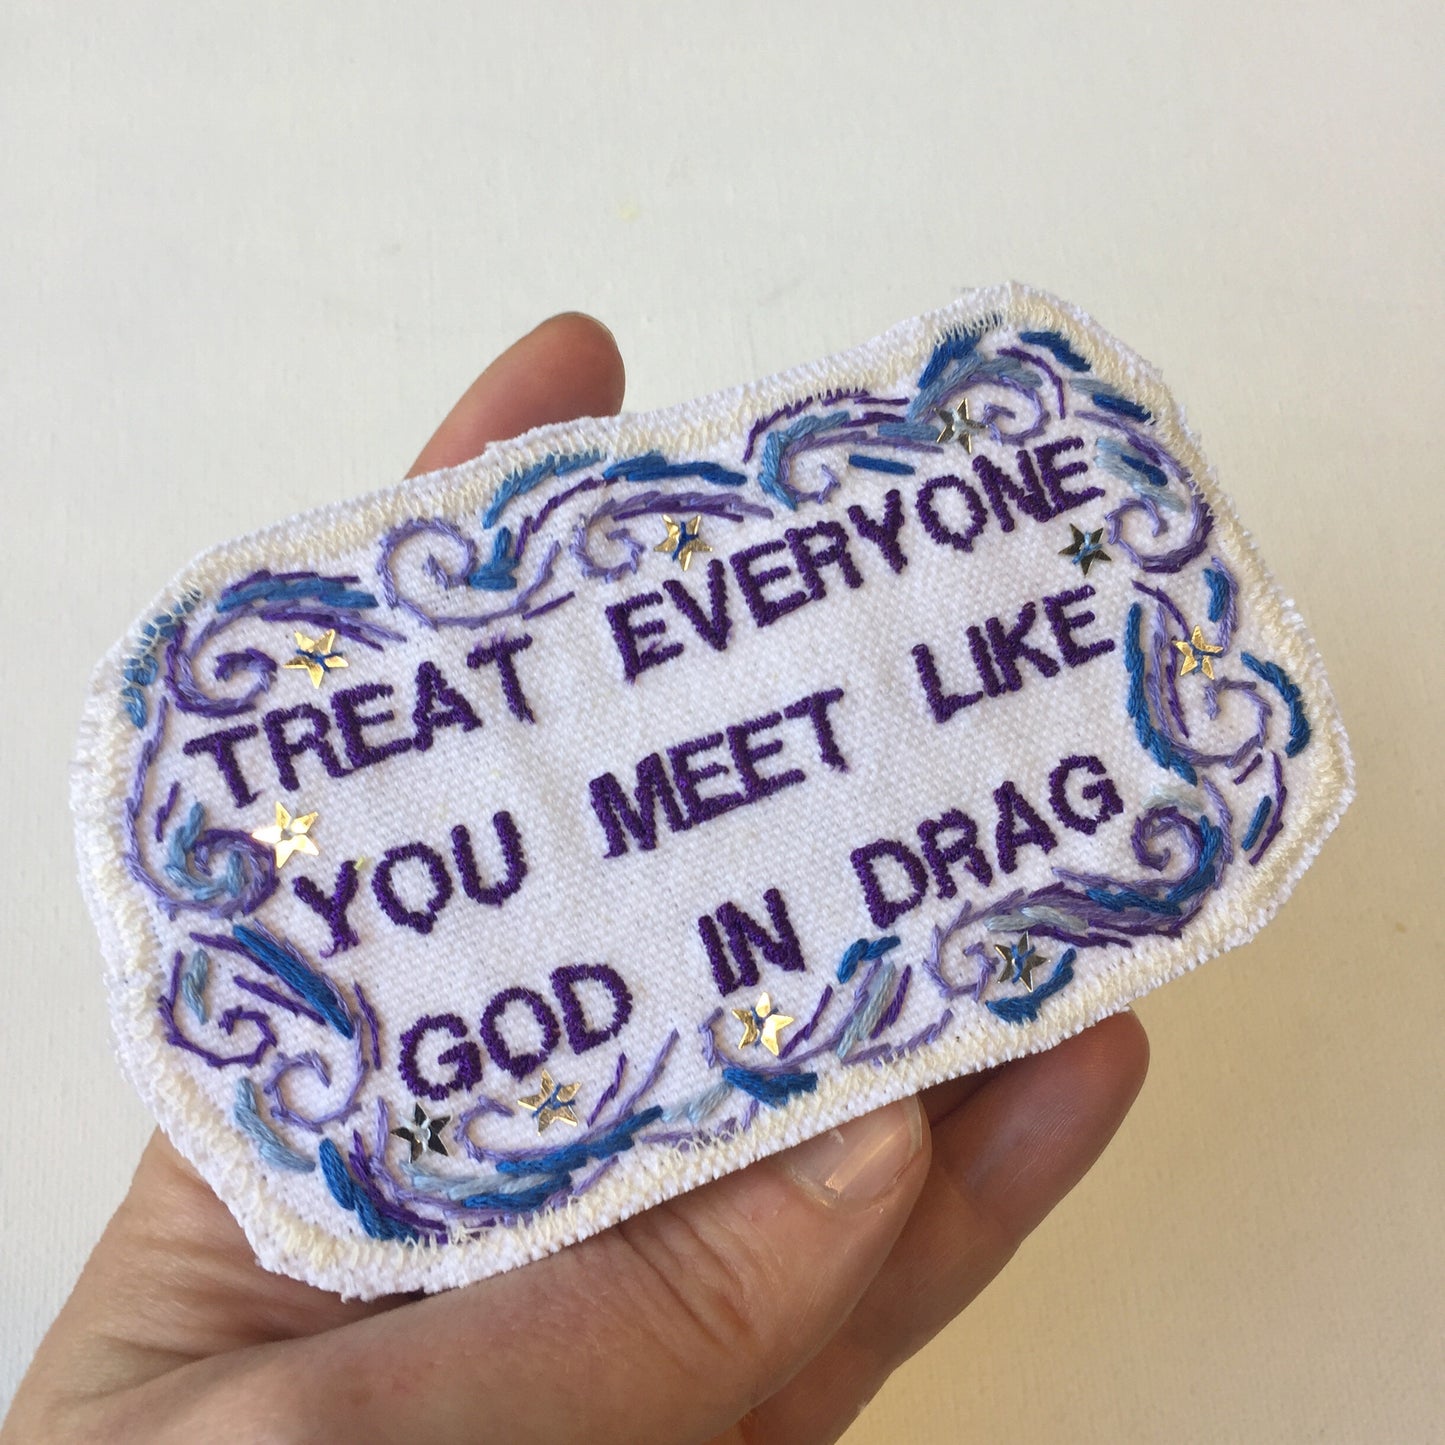 Ram Dass Quote. Handmade Embroidered Canvas Patch. One of a Kind